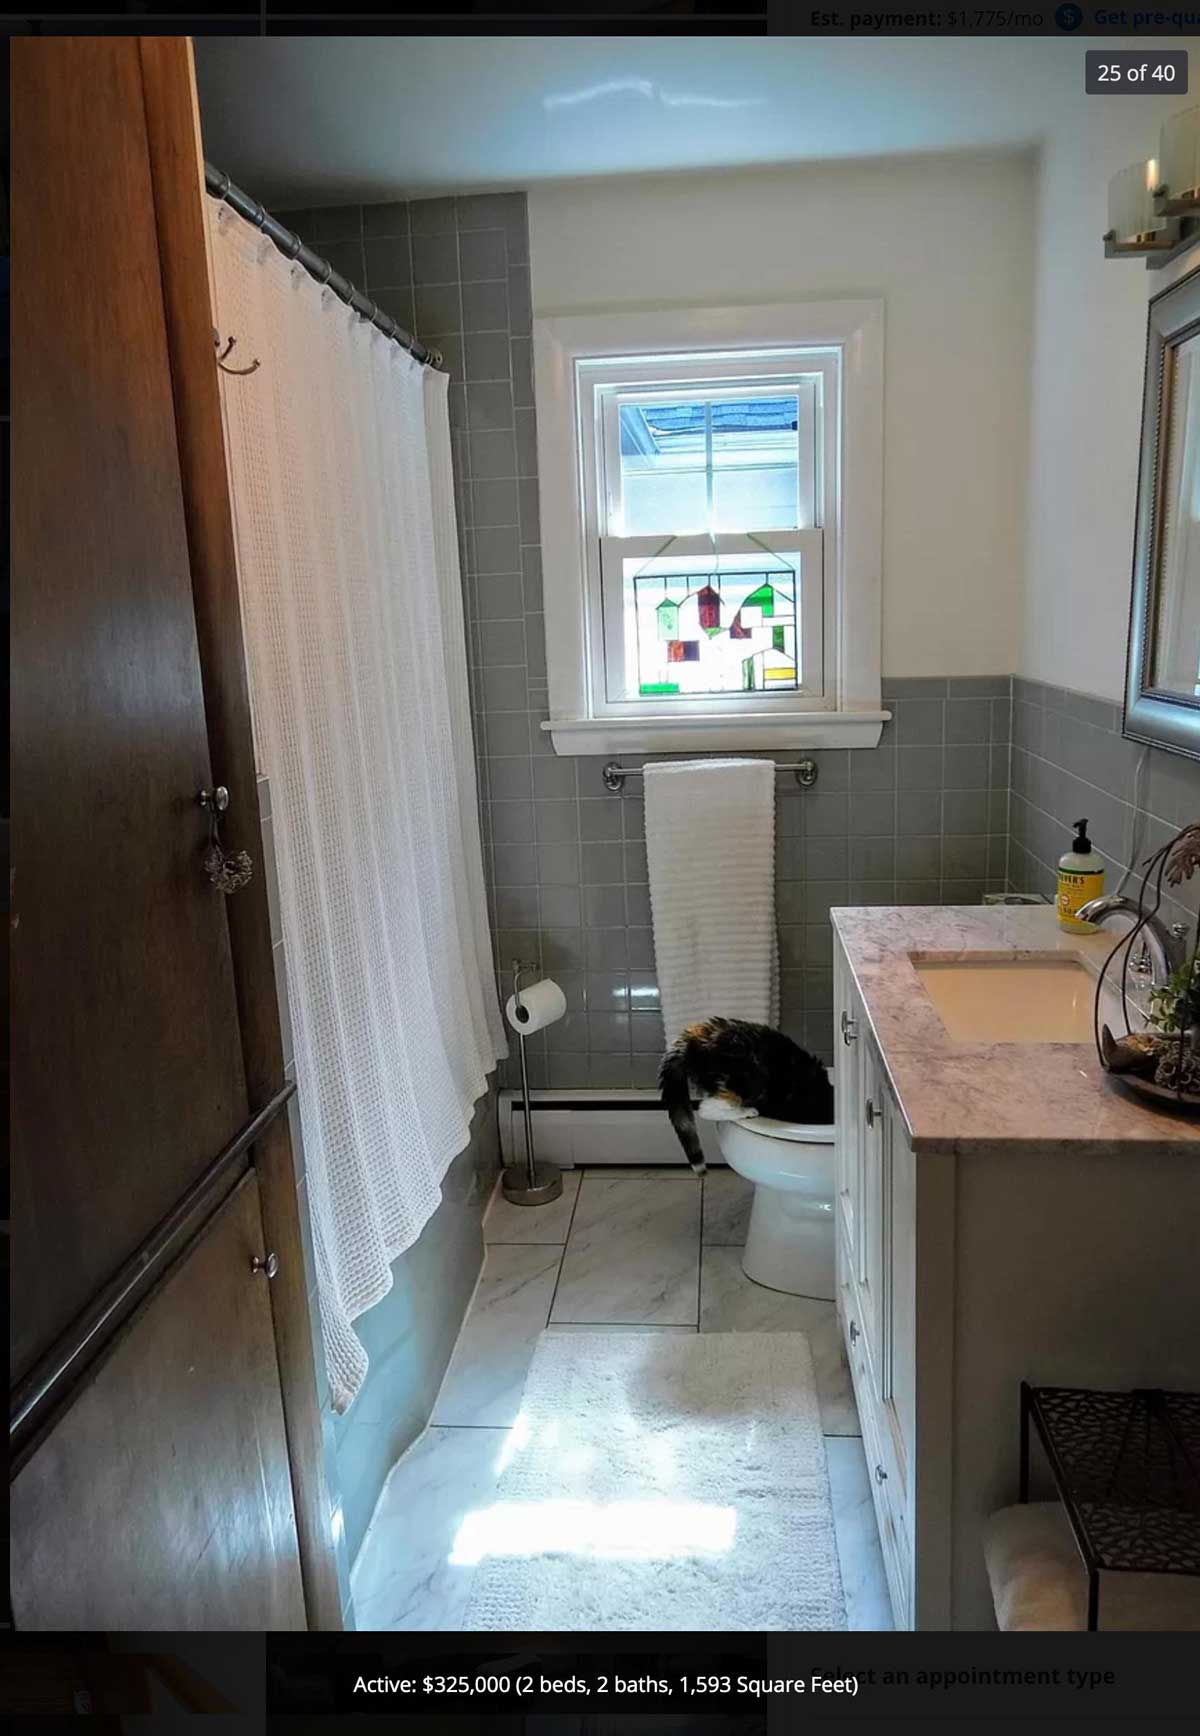 This real estate listing photo made my day